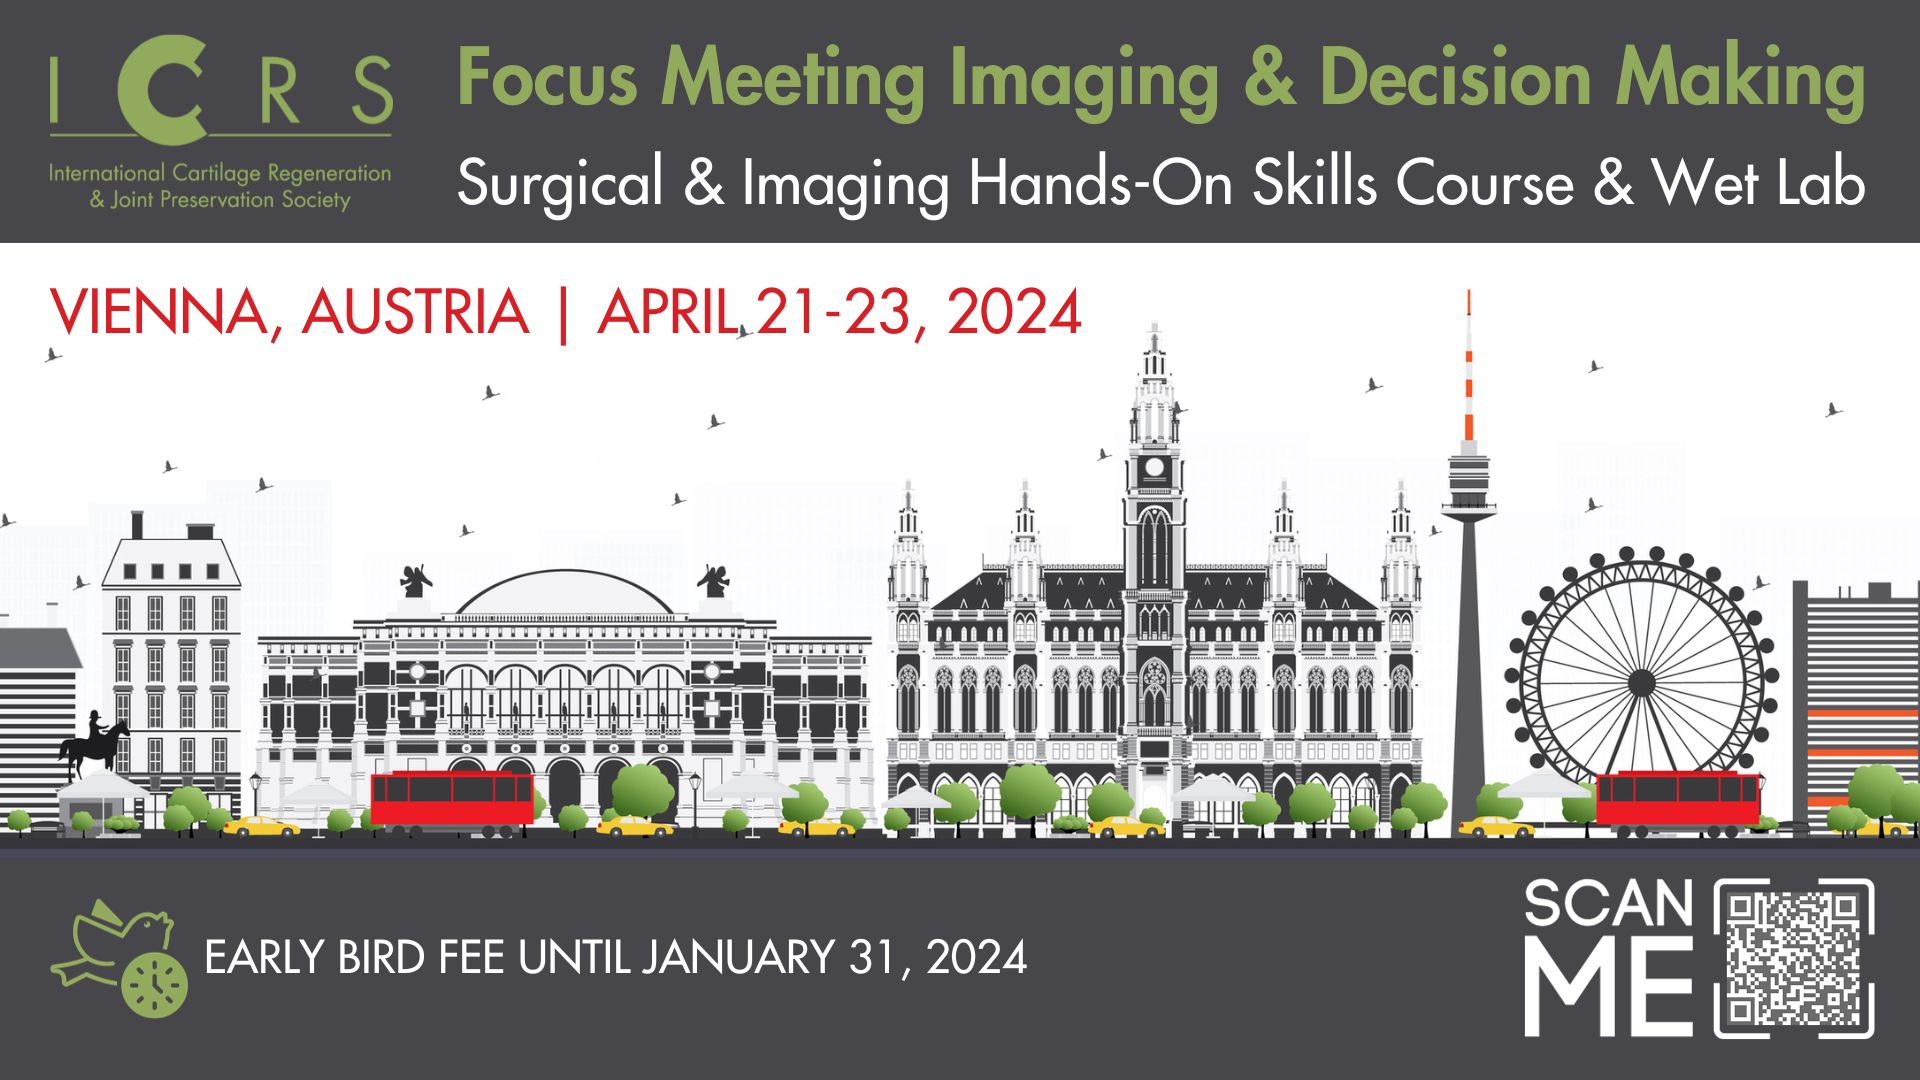 ICRS Focus Meeting Imaging and Decision Making, Vienna, Austria